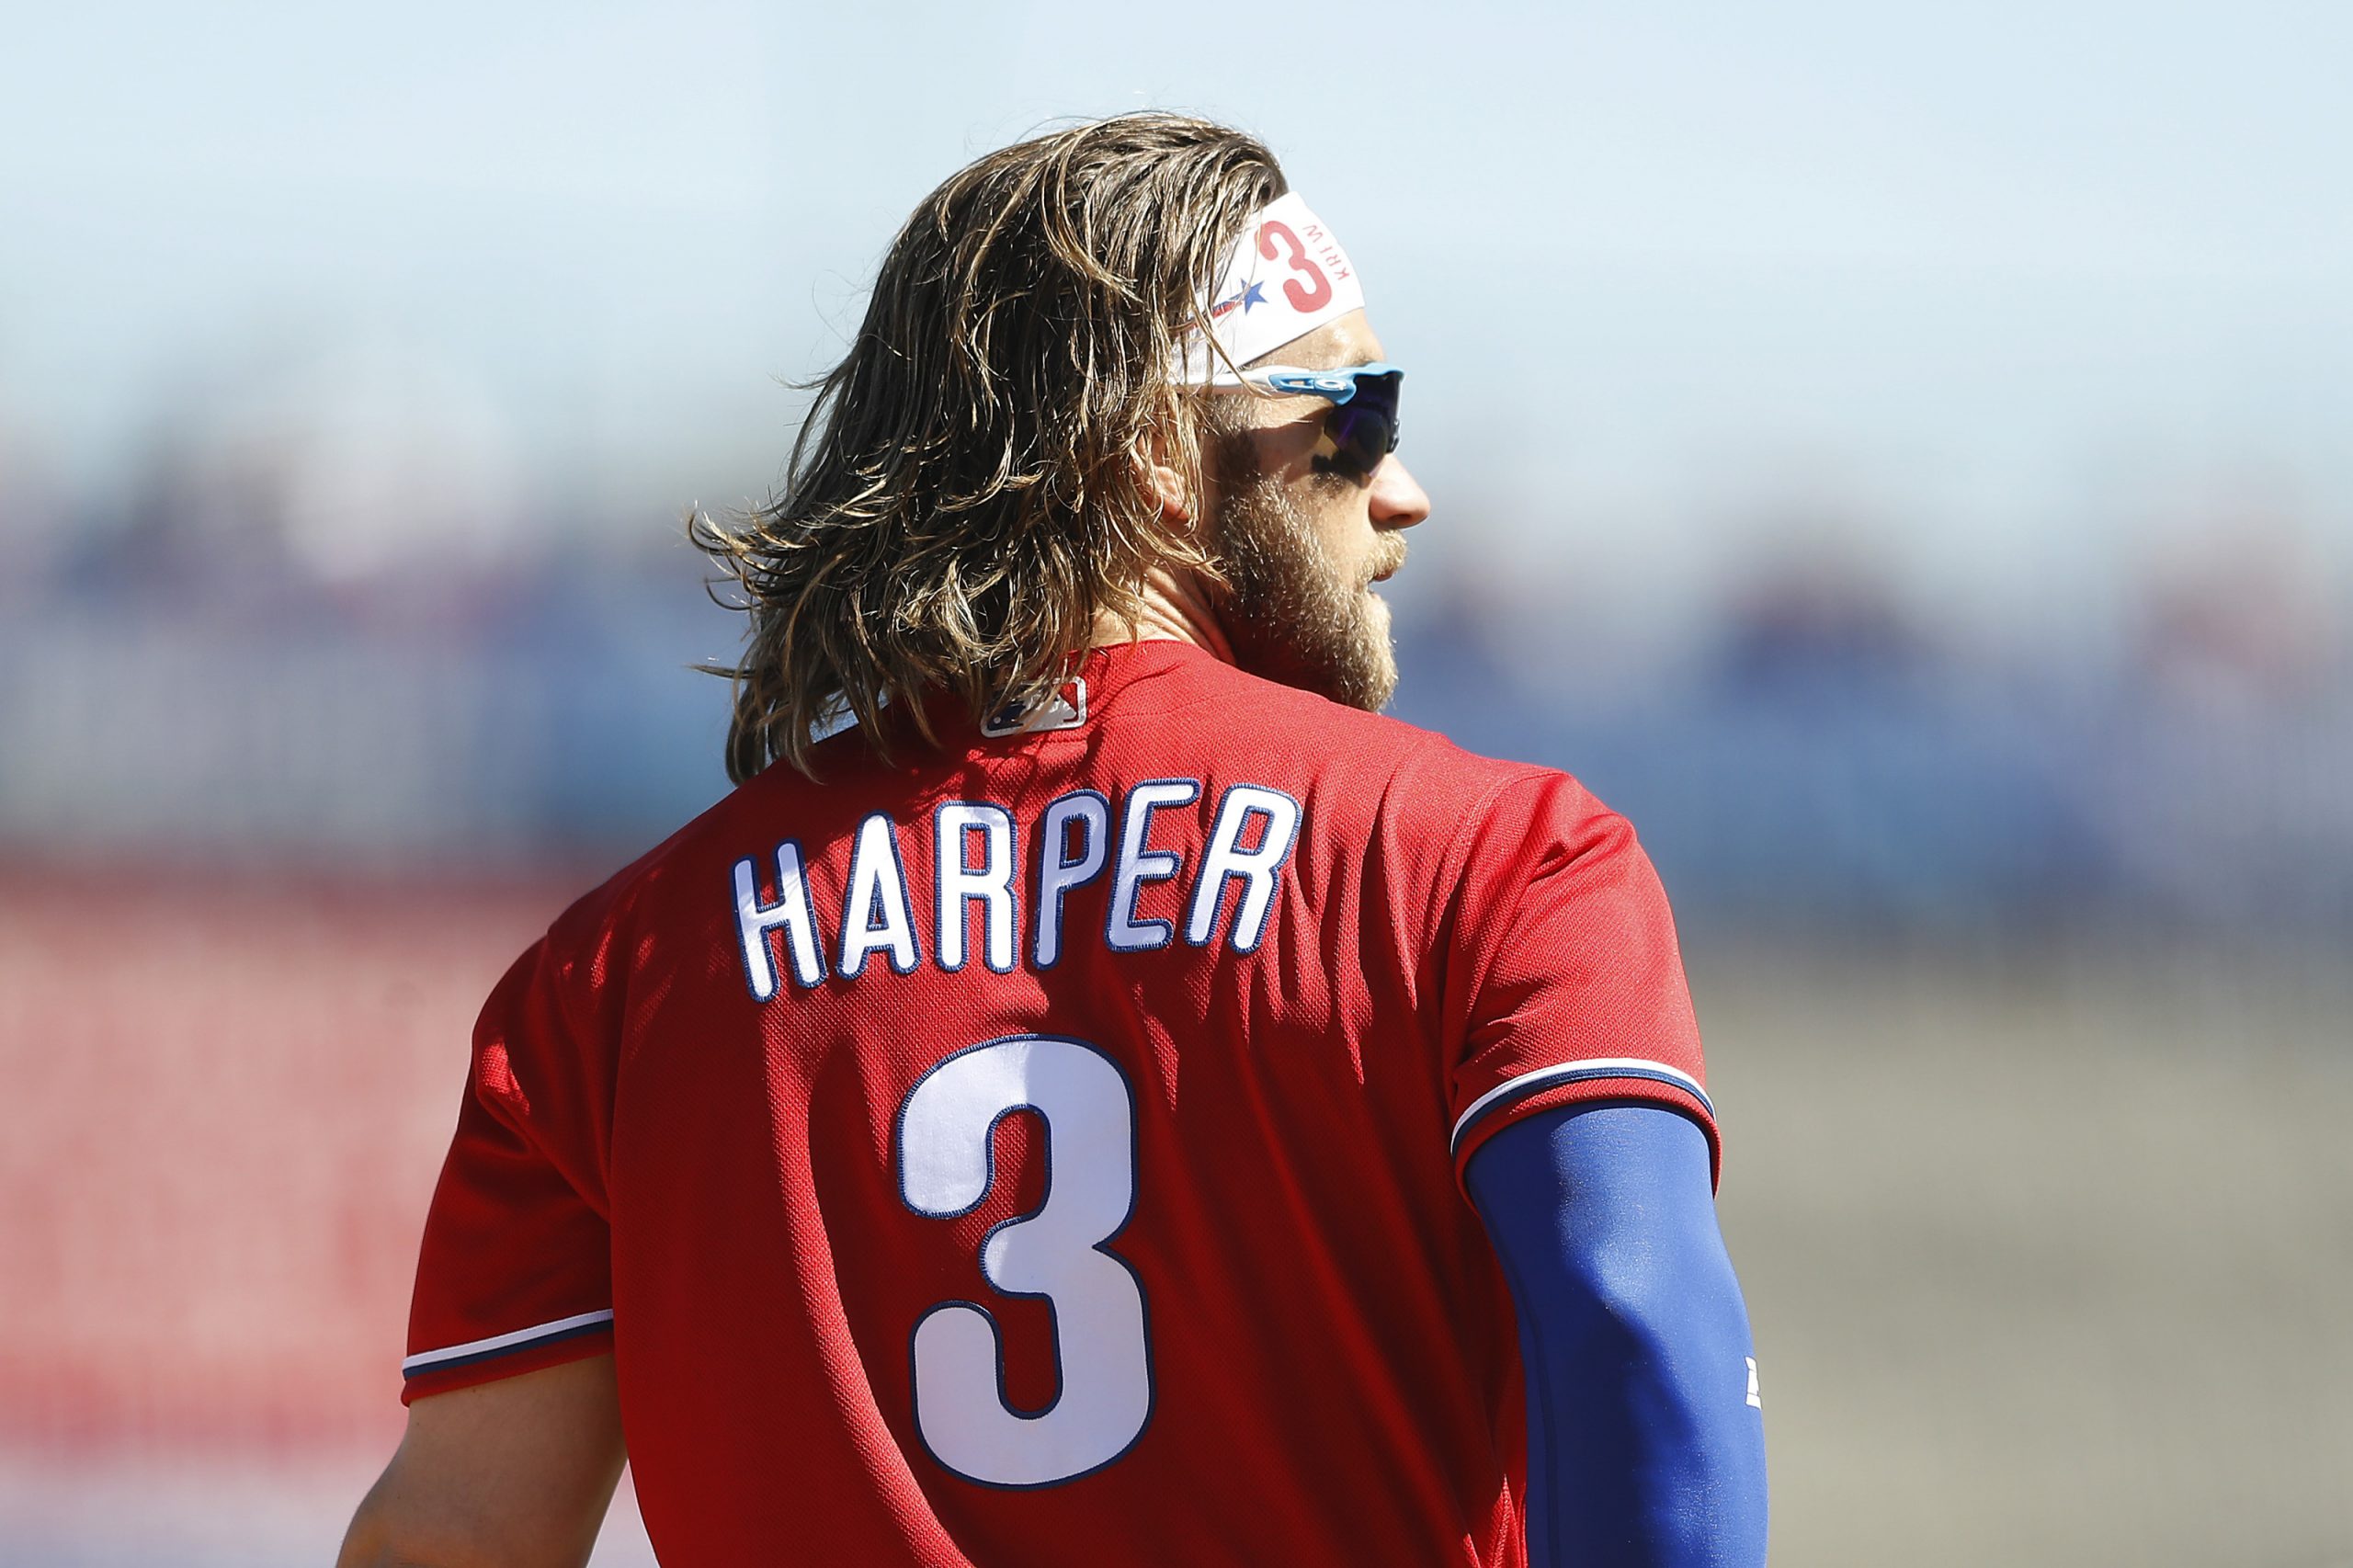 Because he has the best hair in sports.